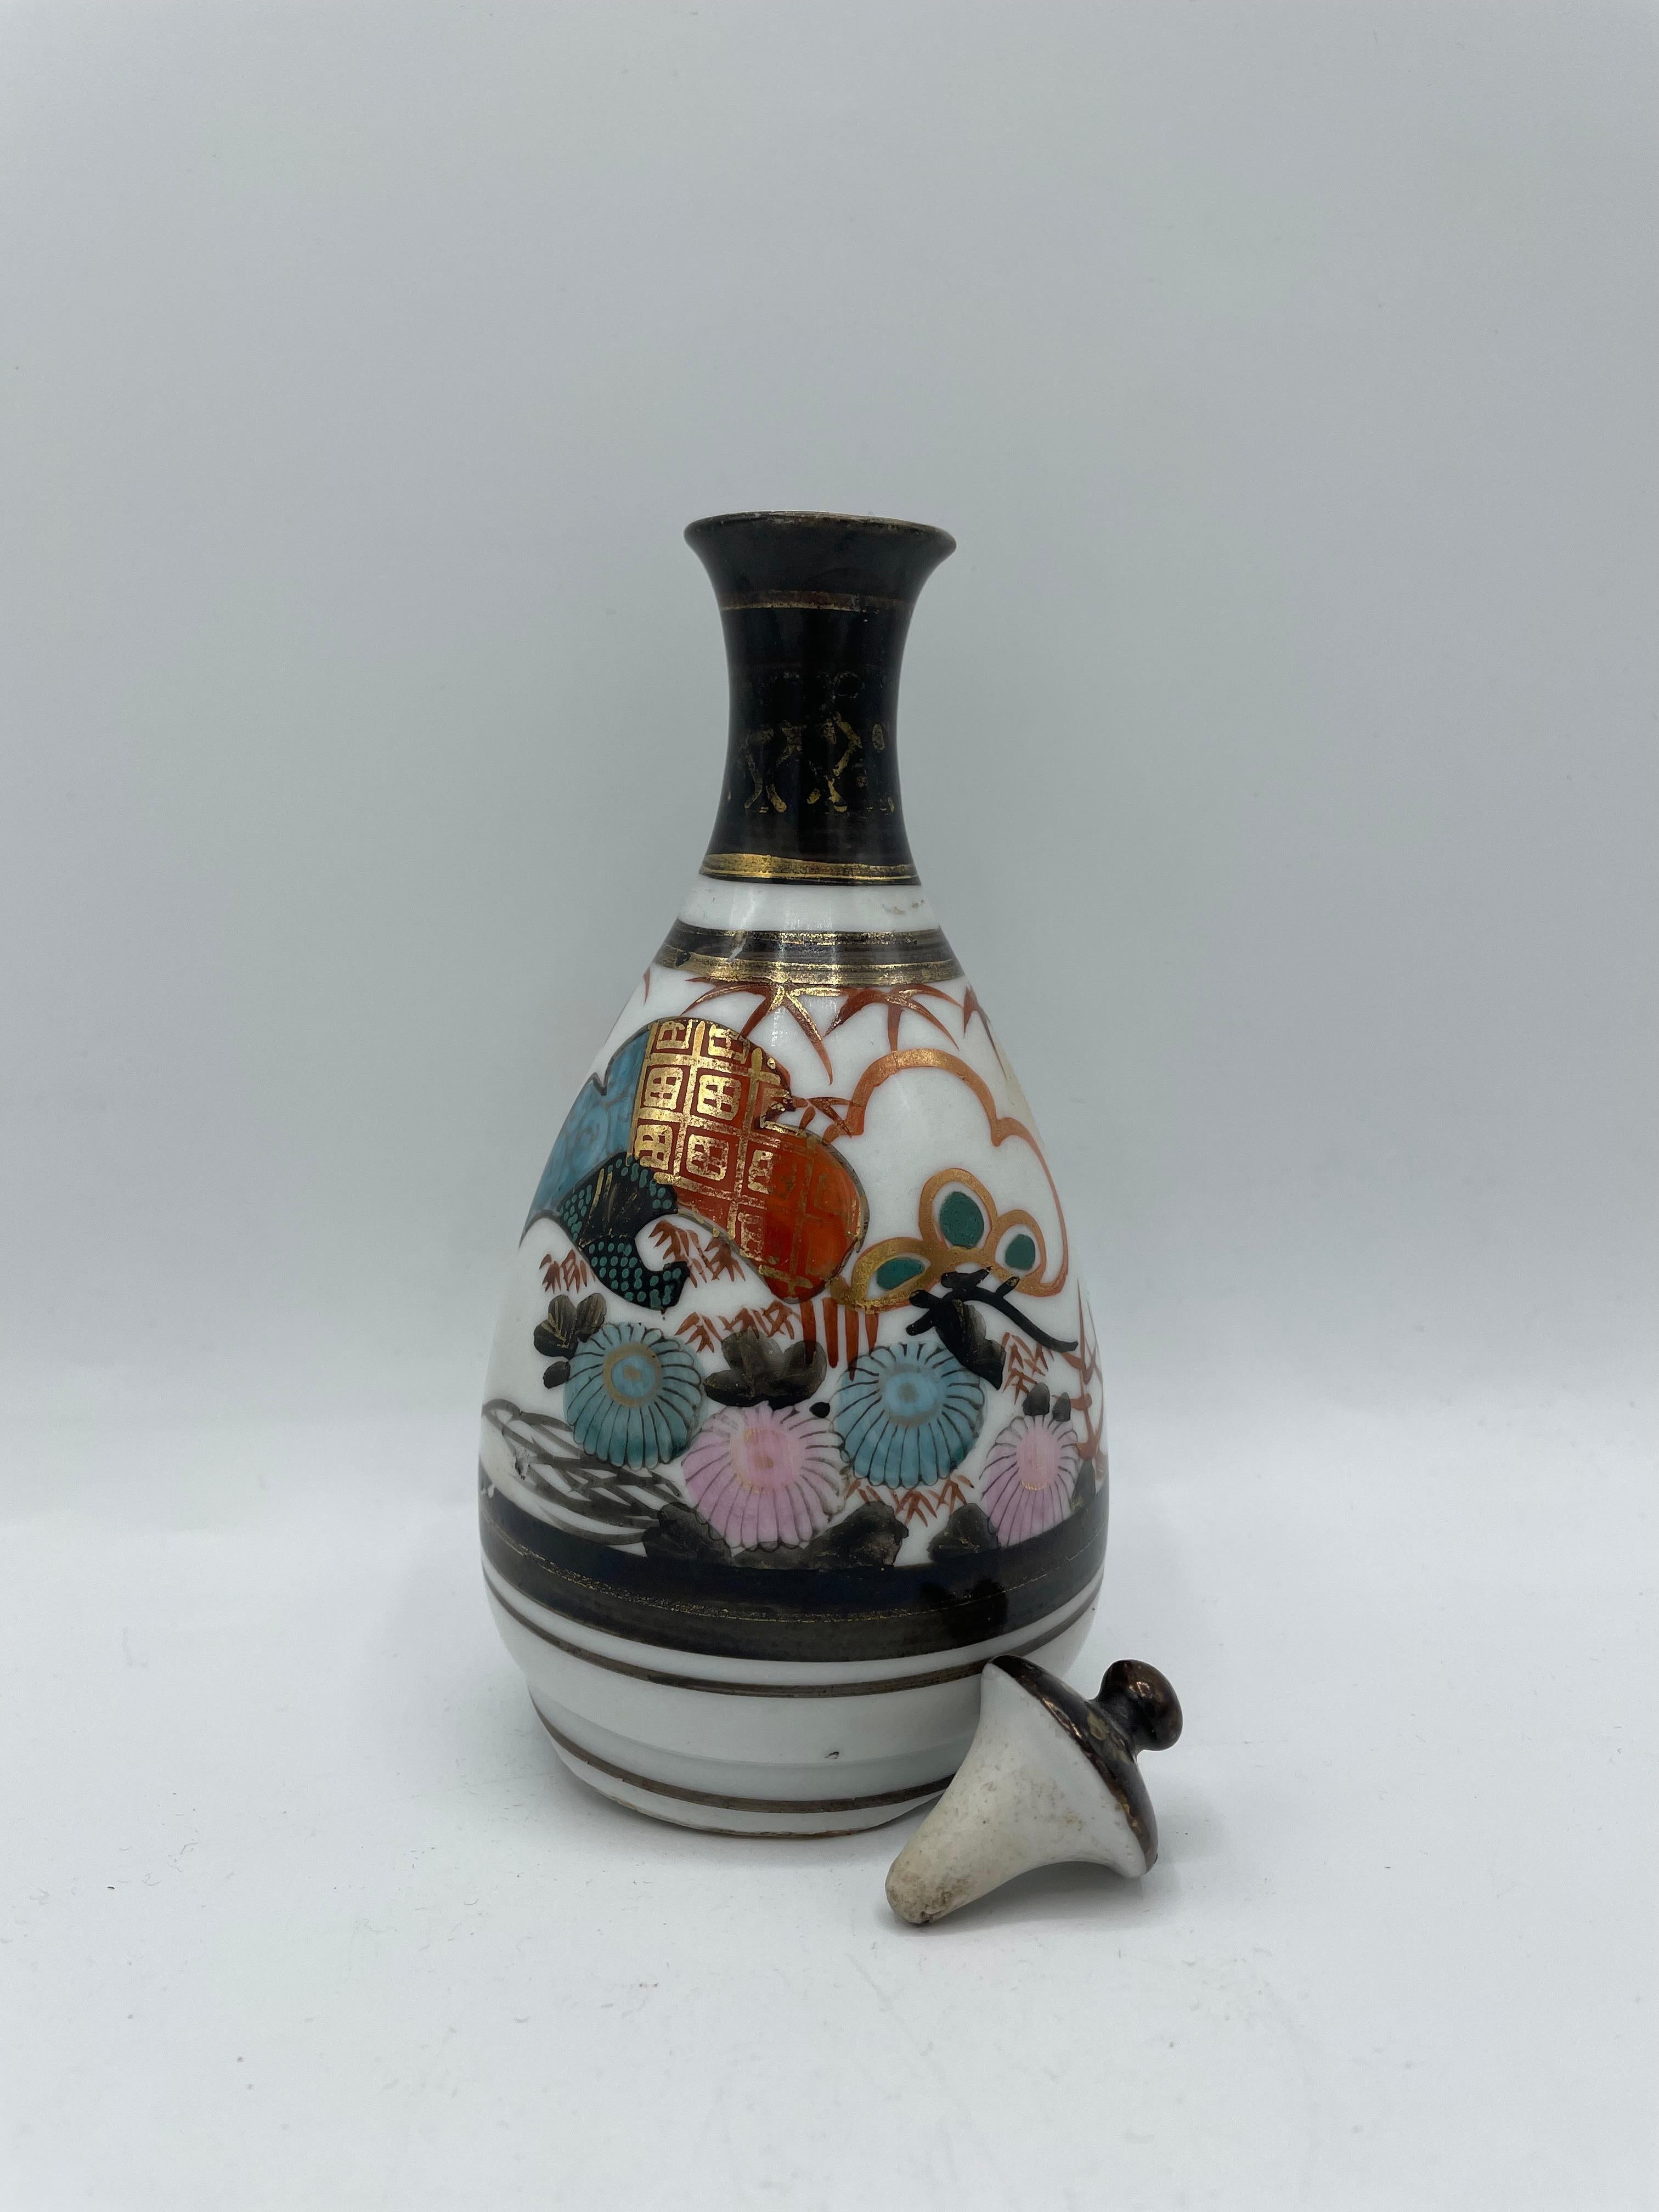 This is a sake bottle which is called 'tokkuri' in Japanese.
This tokkuri is made with porcelain and it is hand painted.
It was made in Showa era around 1970s.
The design is the landscape of Japanese tsuru birds and flowers.
This tokkuri will come